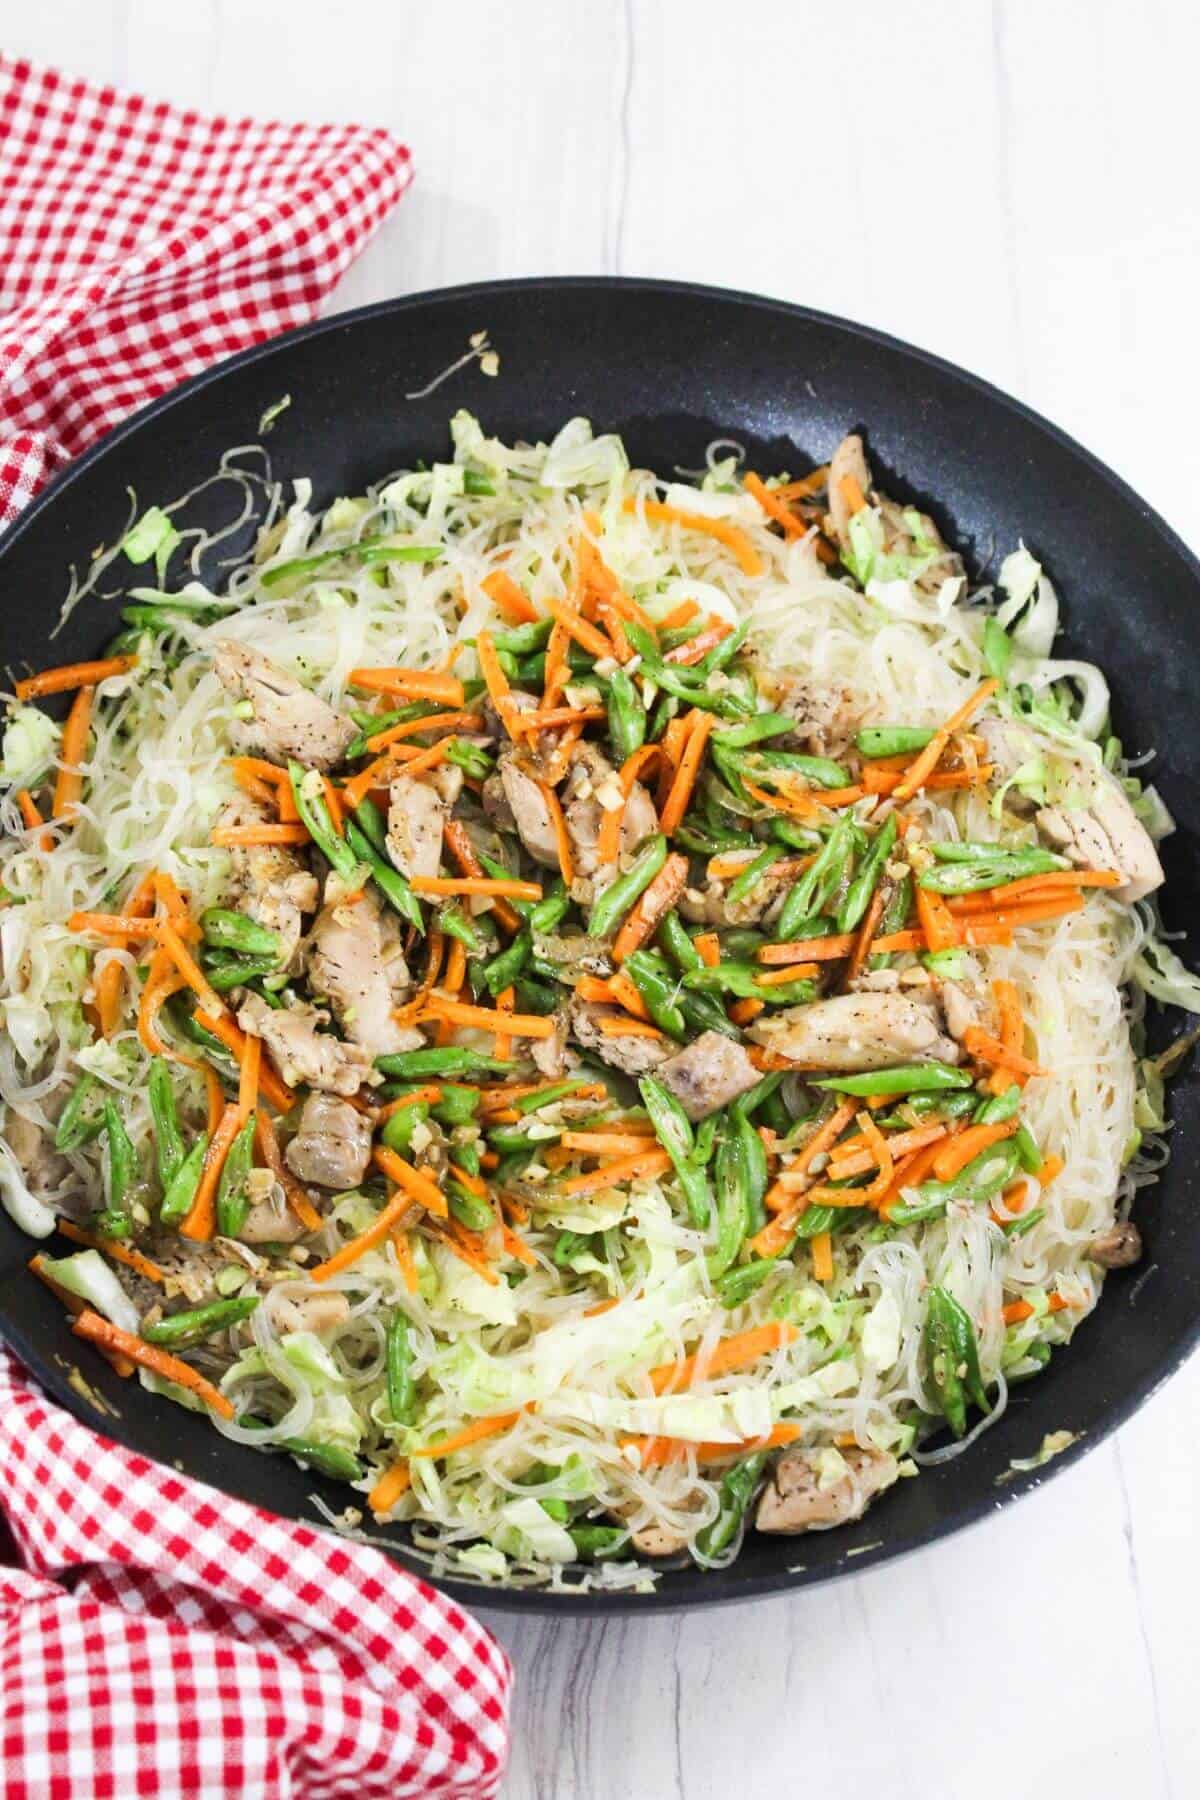 Stir fried noodles with meat and vegetables in a frying pan.